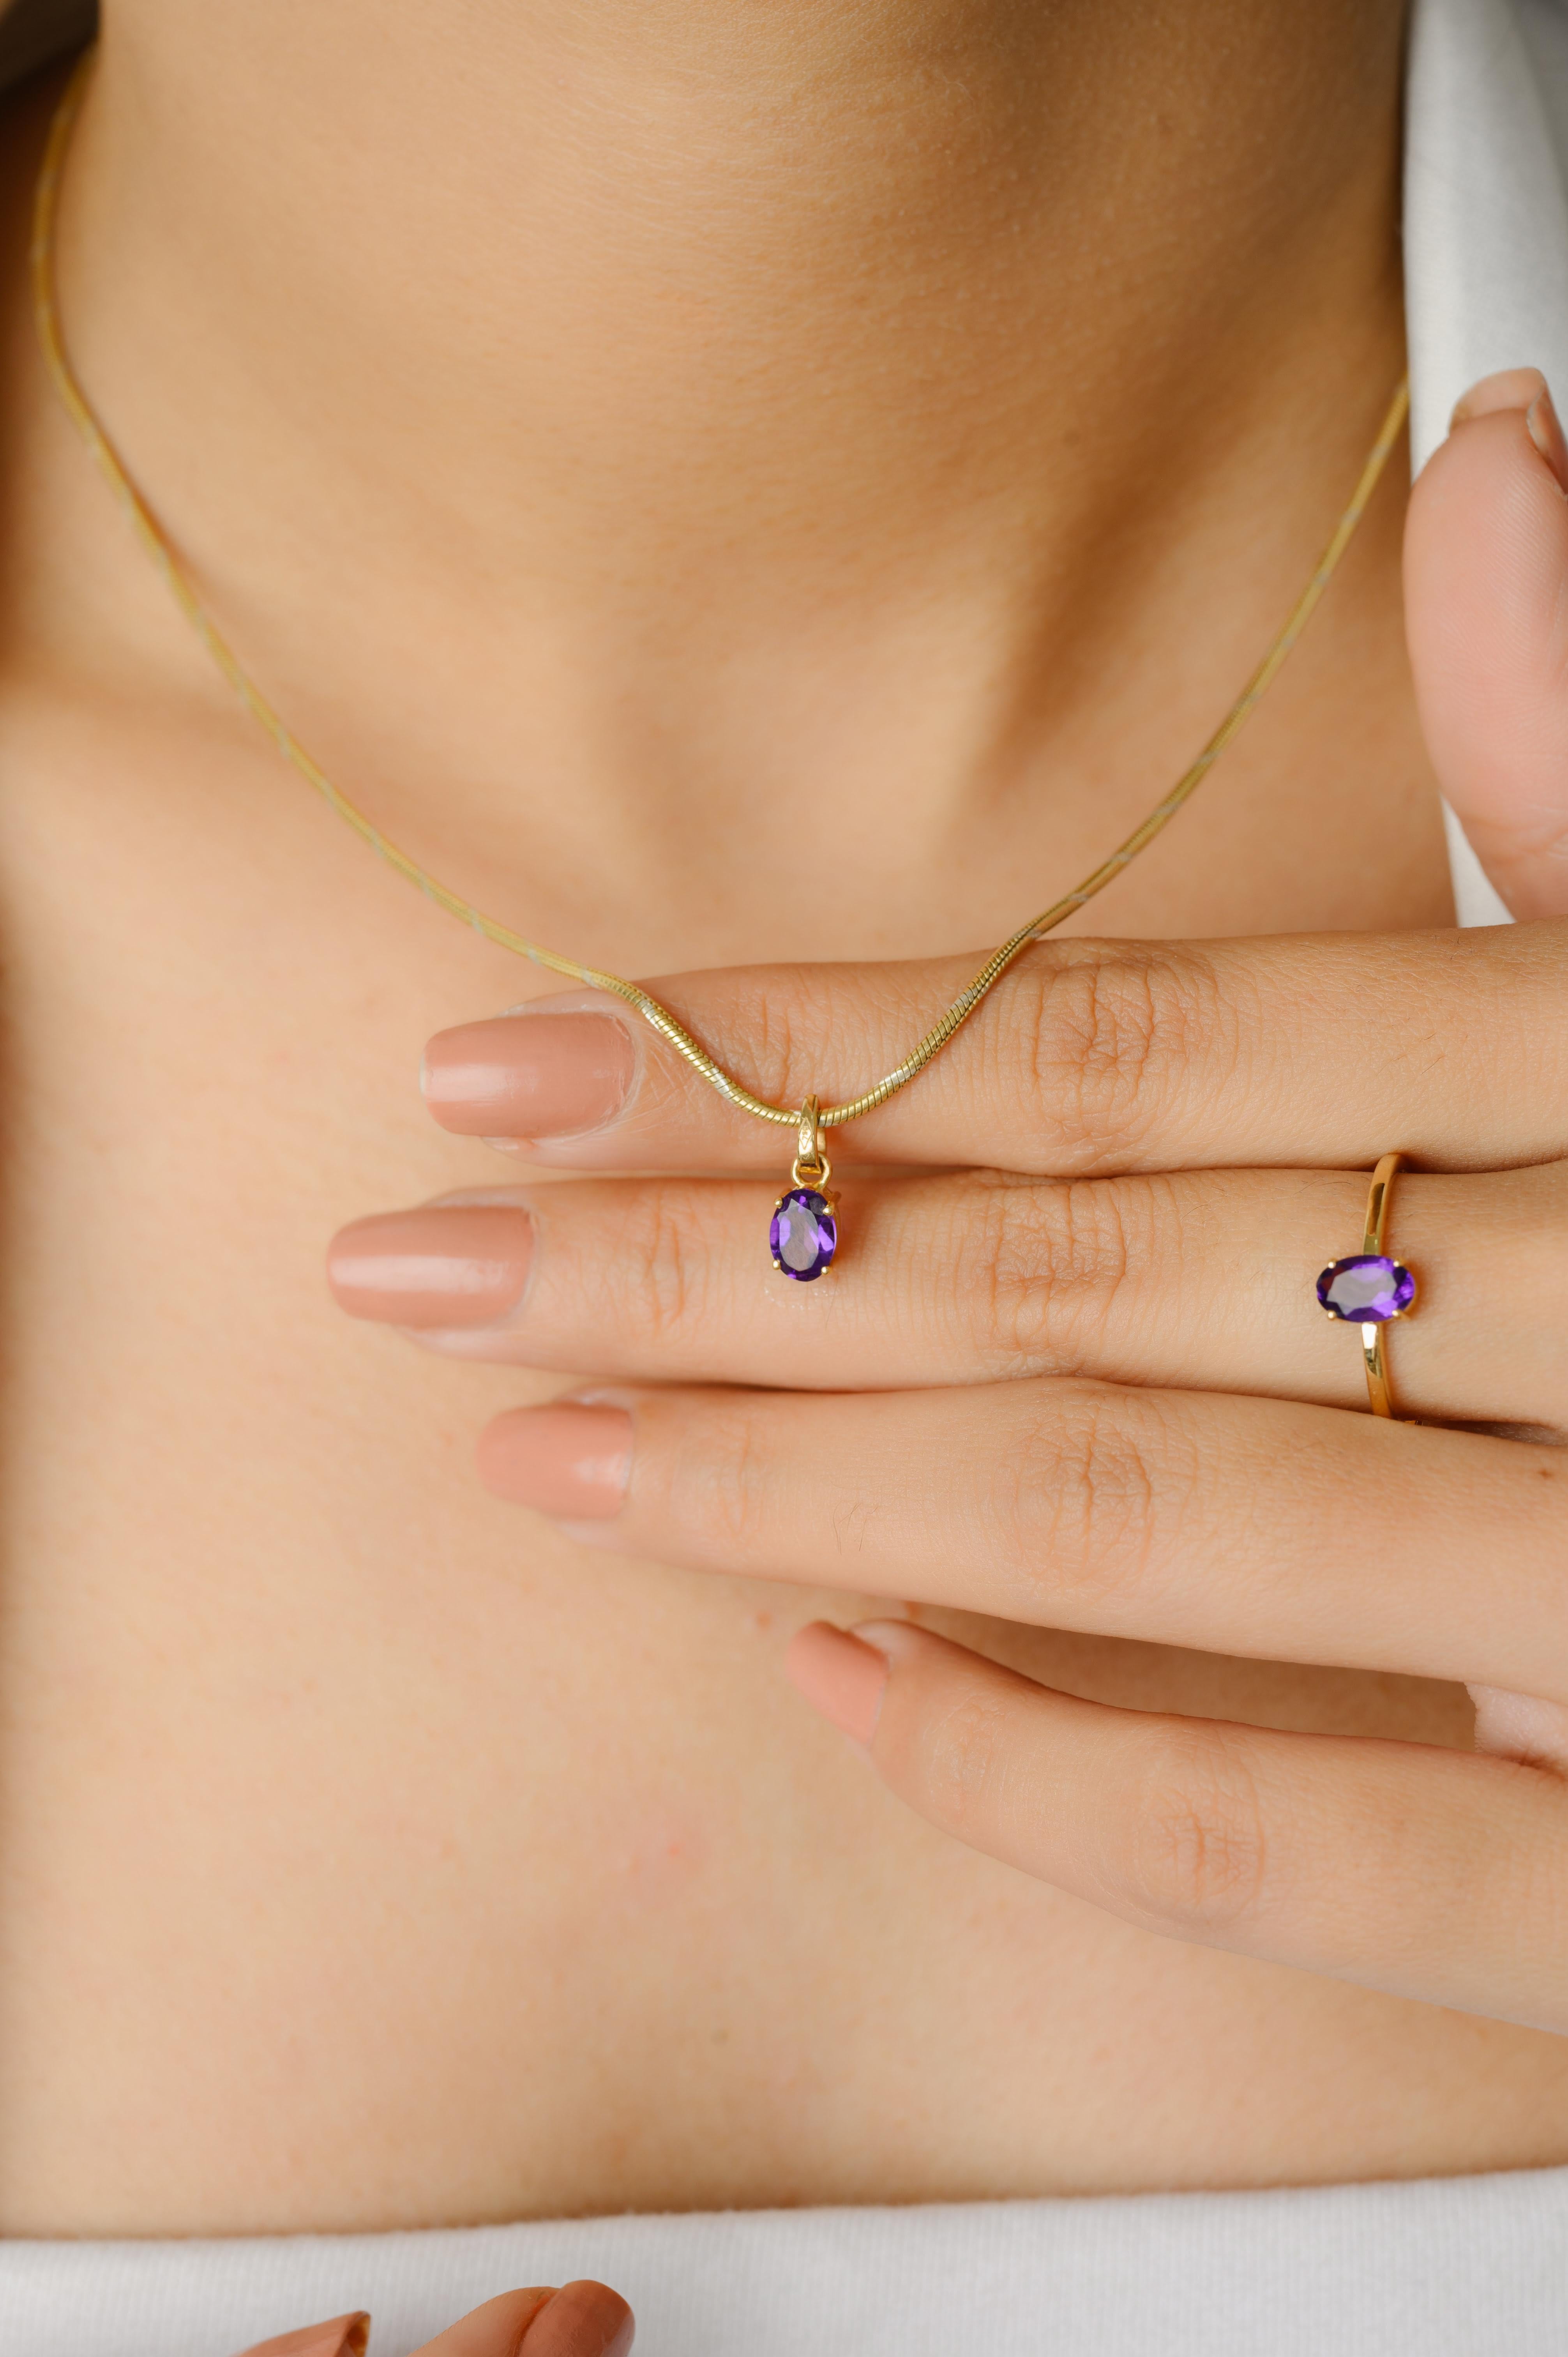 For Sale:  18k Solid Yellow Gold Amethyst Ring, Pendant and Earring Jewelry Set Gift 7